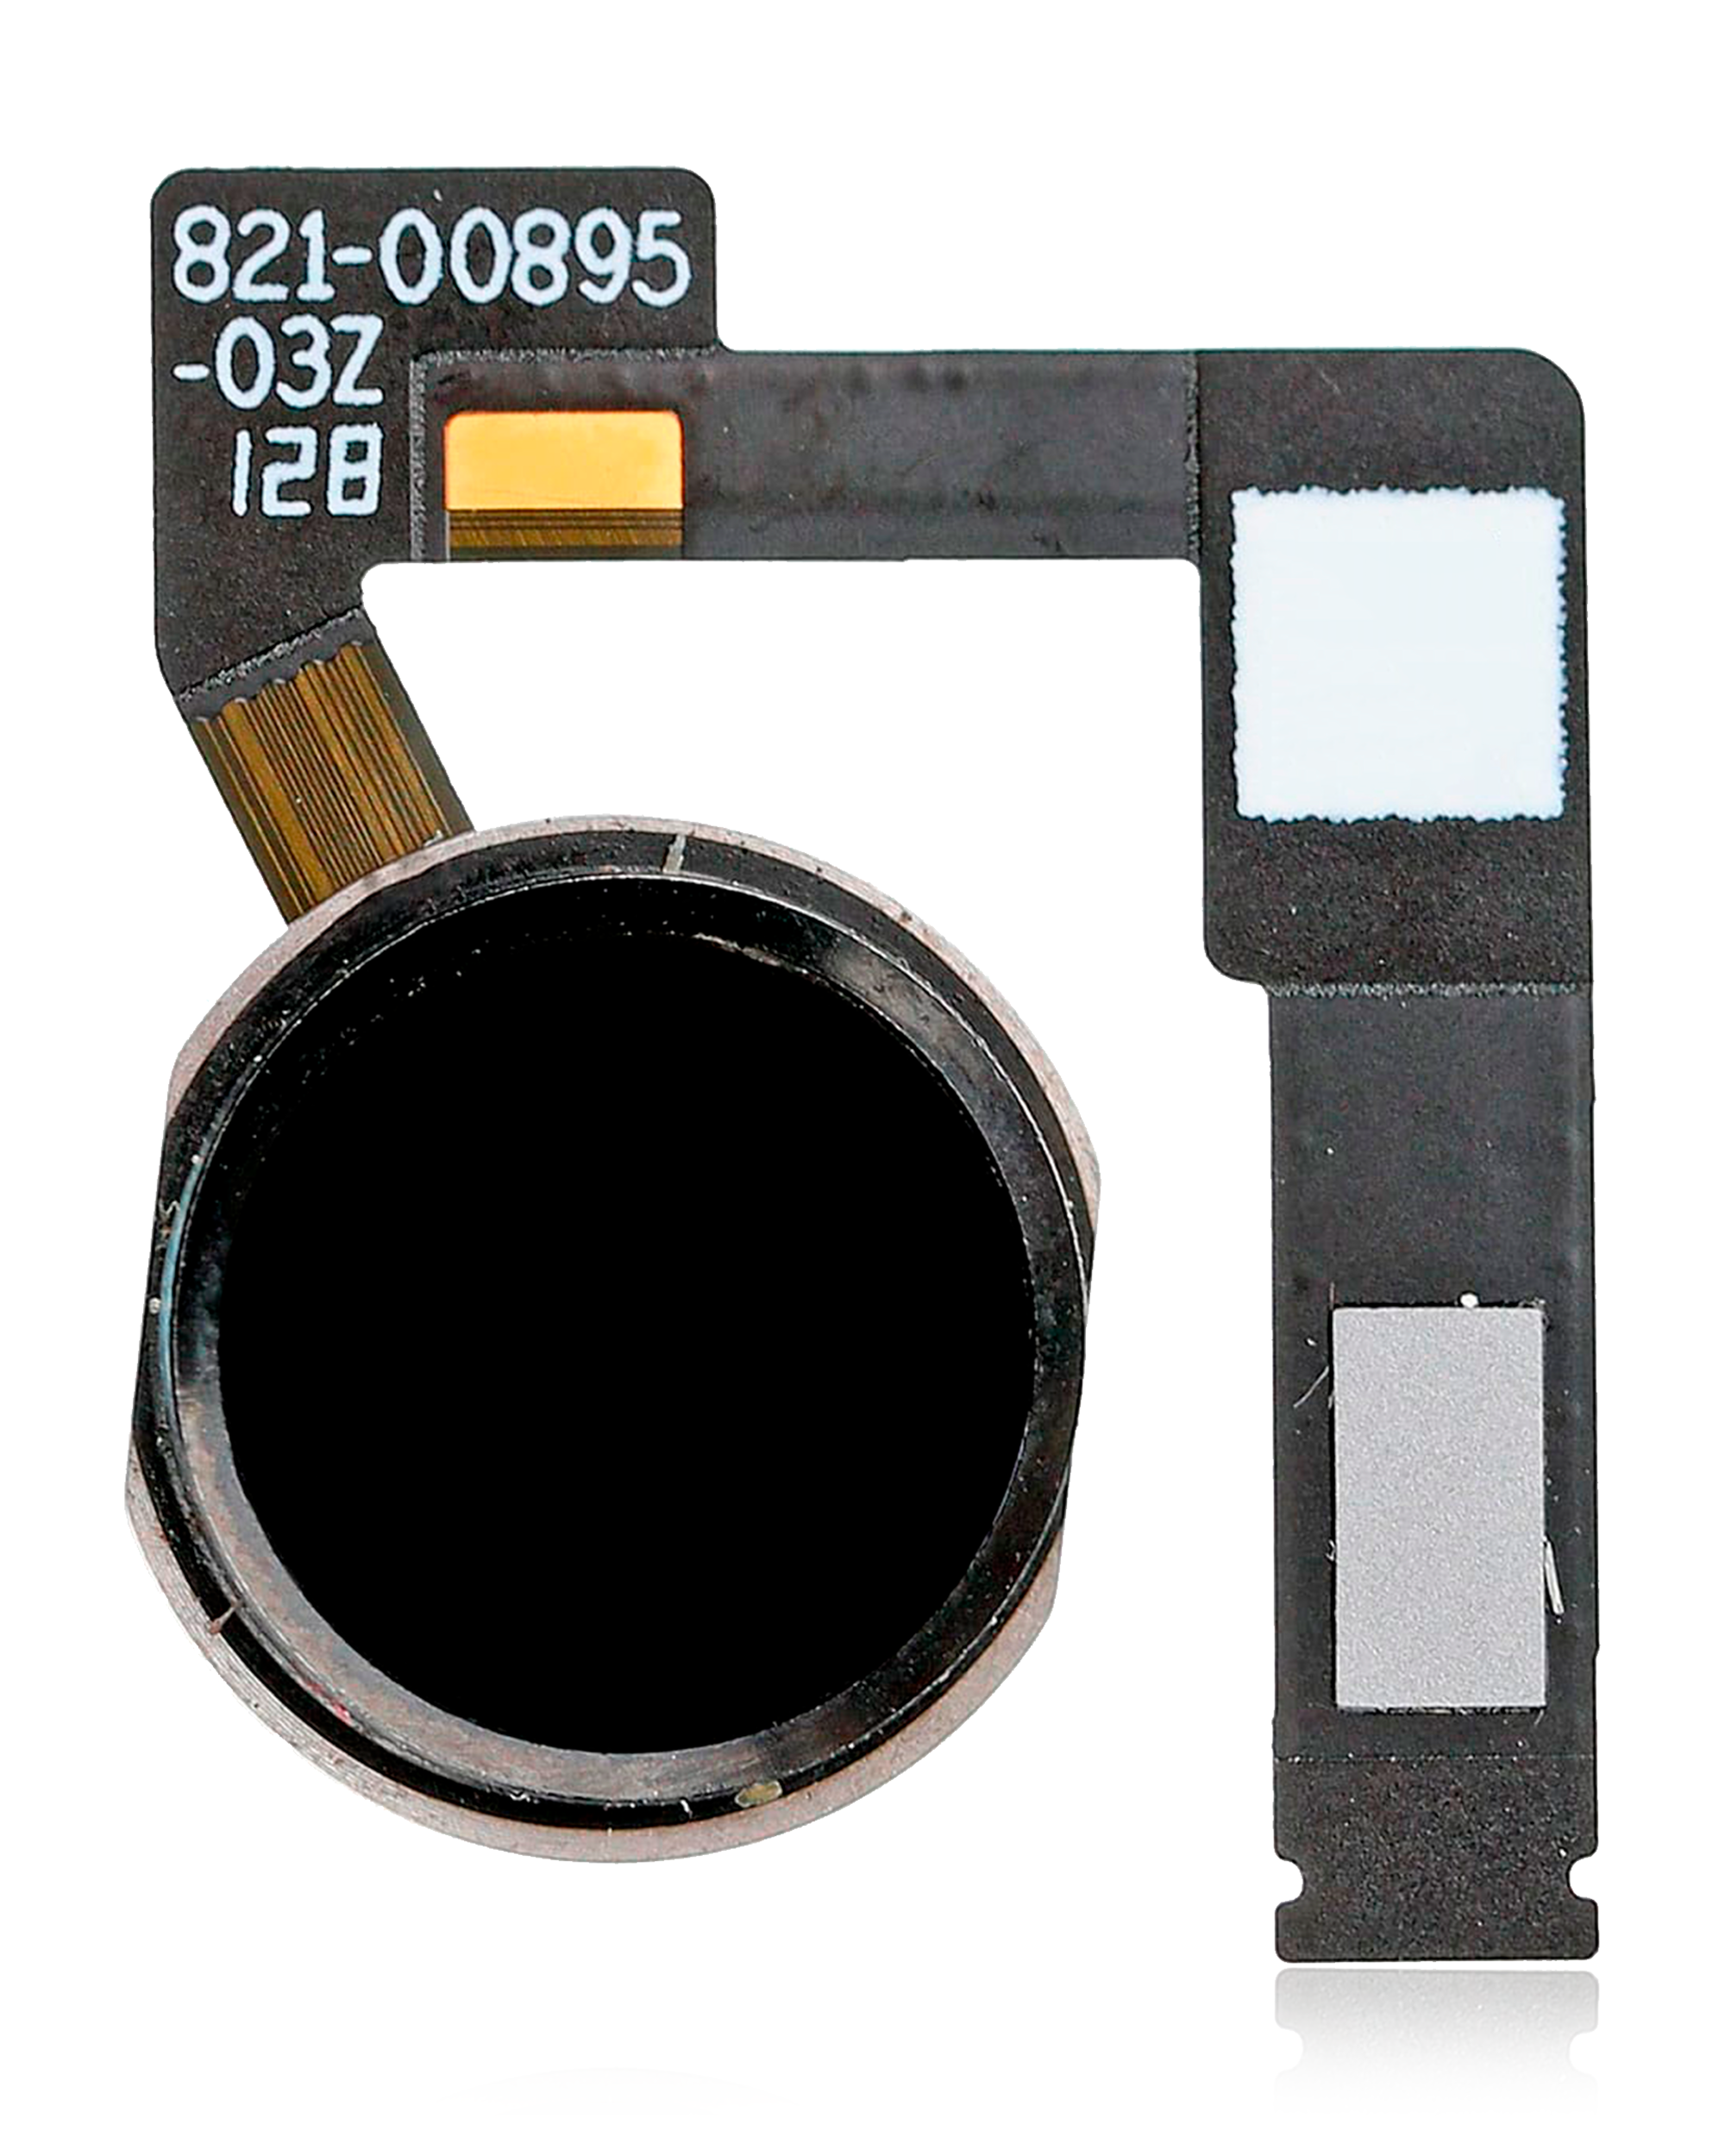 For iPad Pro 10.5" / iPad Air 3 / iPad Pro 12.9 (2nd Gen: 2017) Home Button Flex Cable Replacement (All Color)